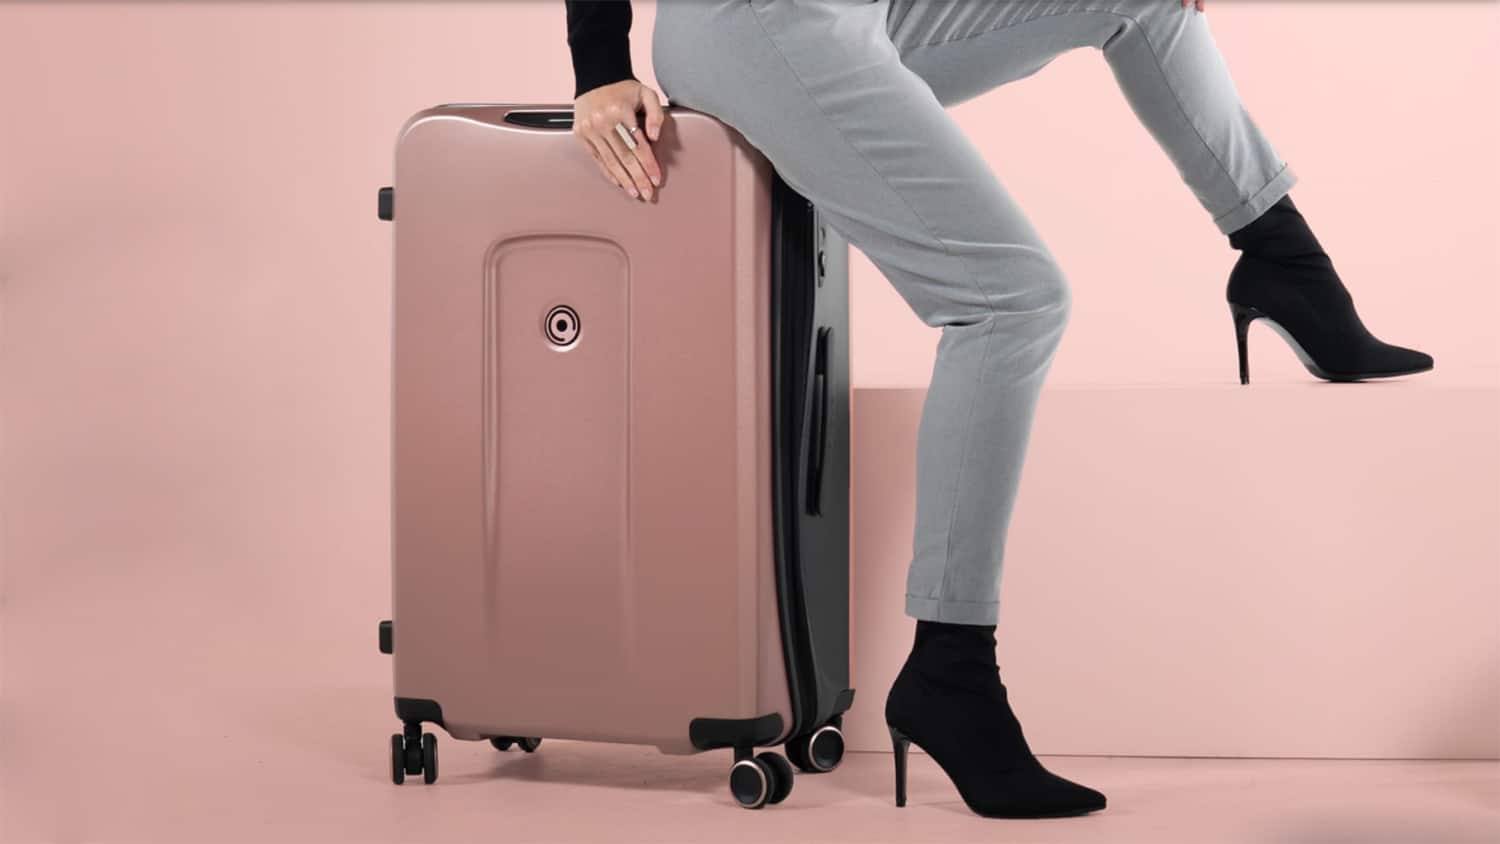 Plevo Smart Luggage comes with game-changing additional features.